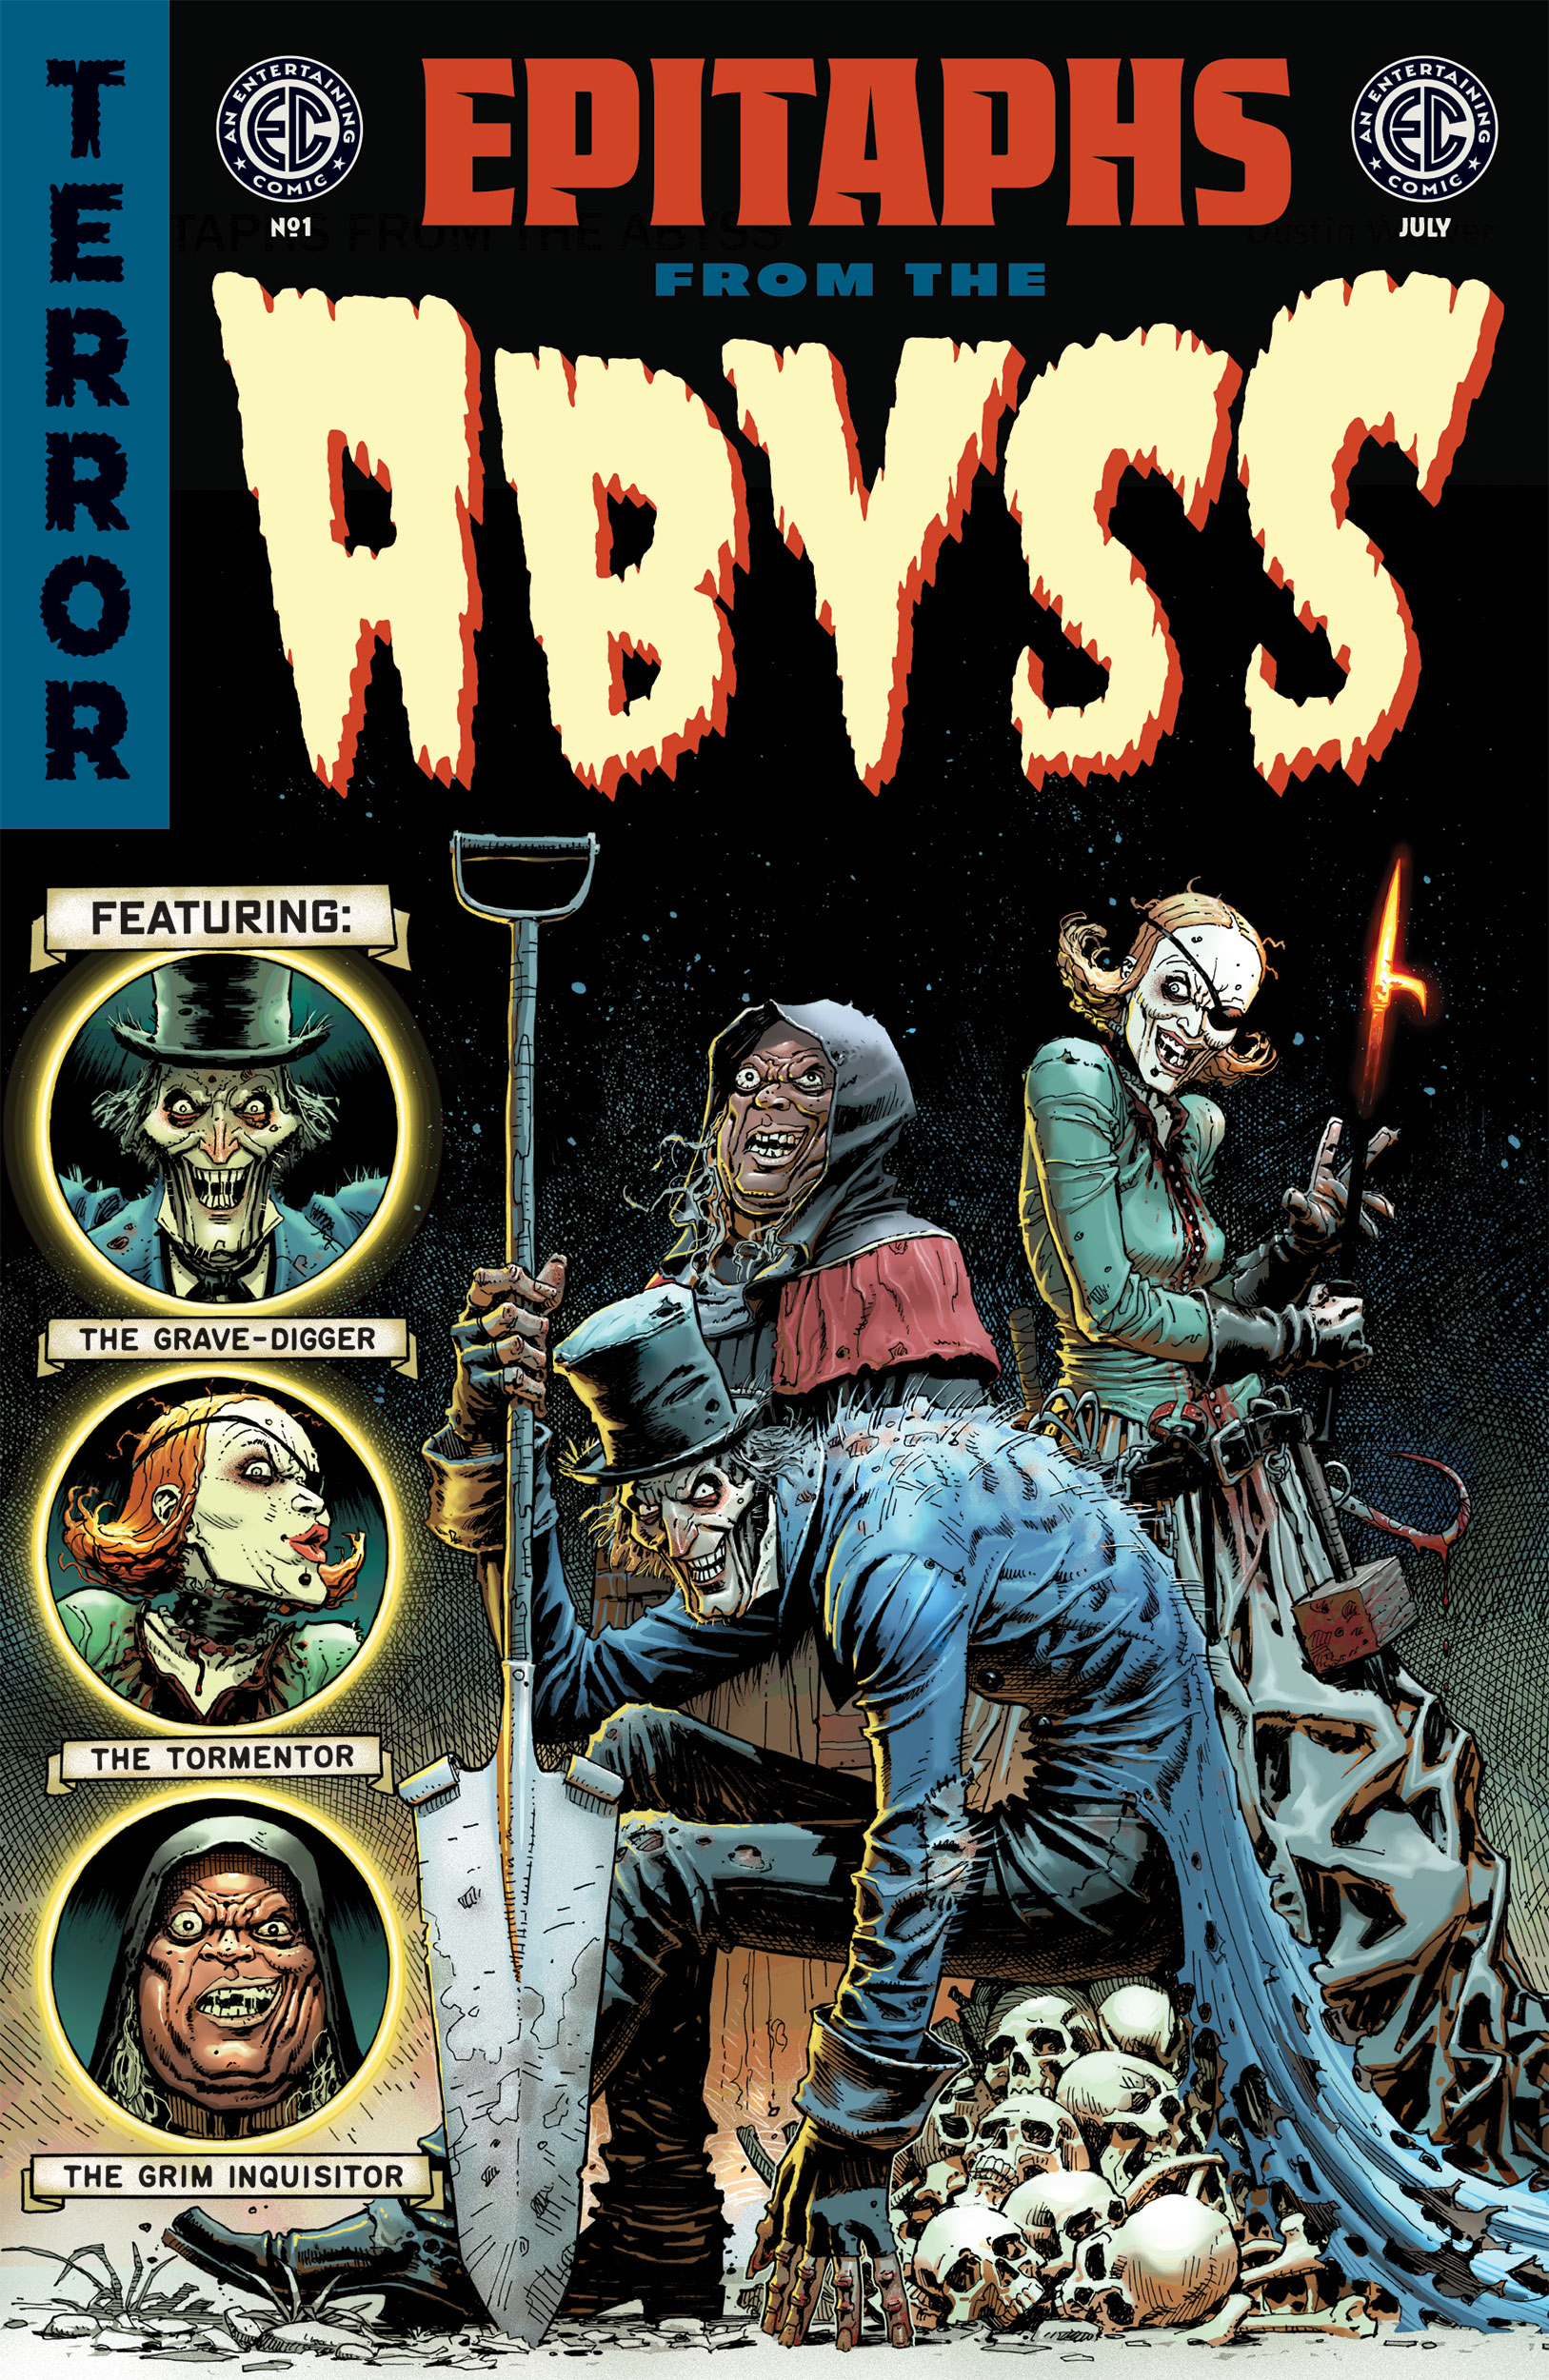 EC Epitaphs from the Abyss #1 Cover I 1 for 100 Incentive Dustin Weaver Vault of Horror Homage #15 Variant (Of 4)